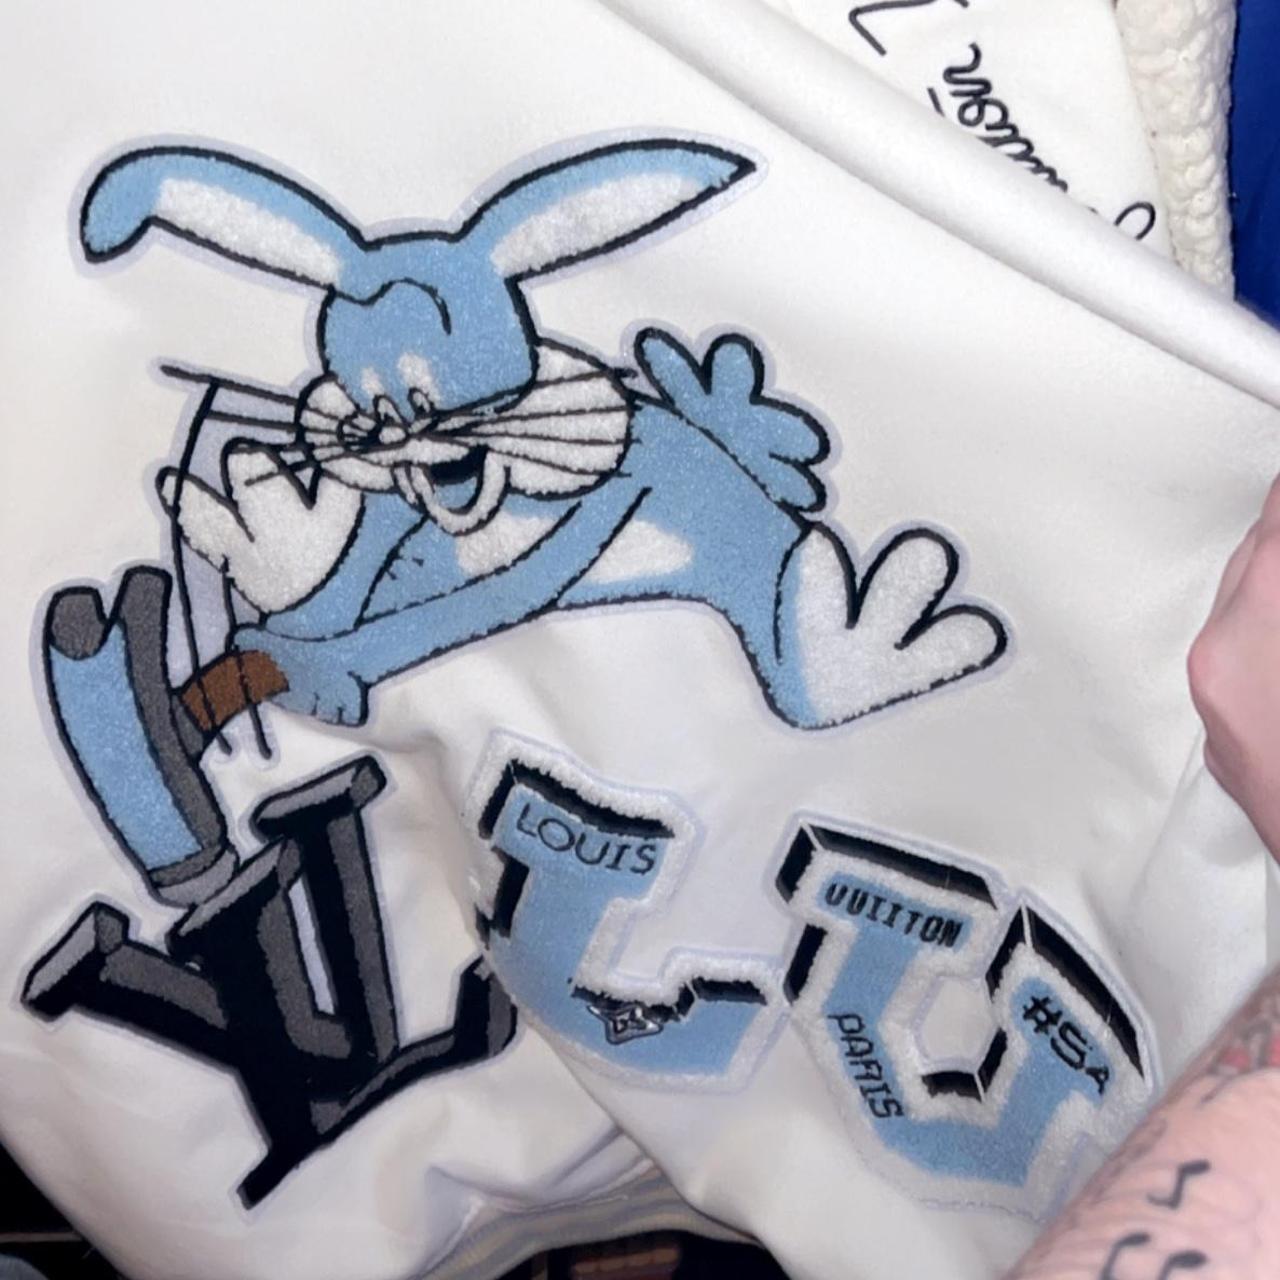 Louis Vuitton bunny T-Shirt in black and white , - Depop